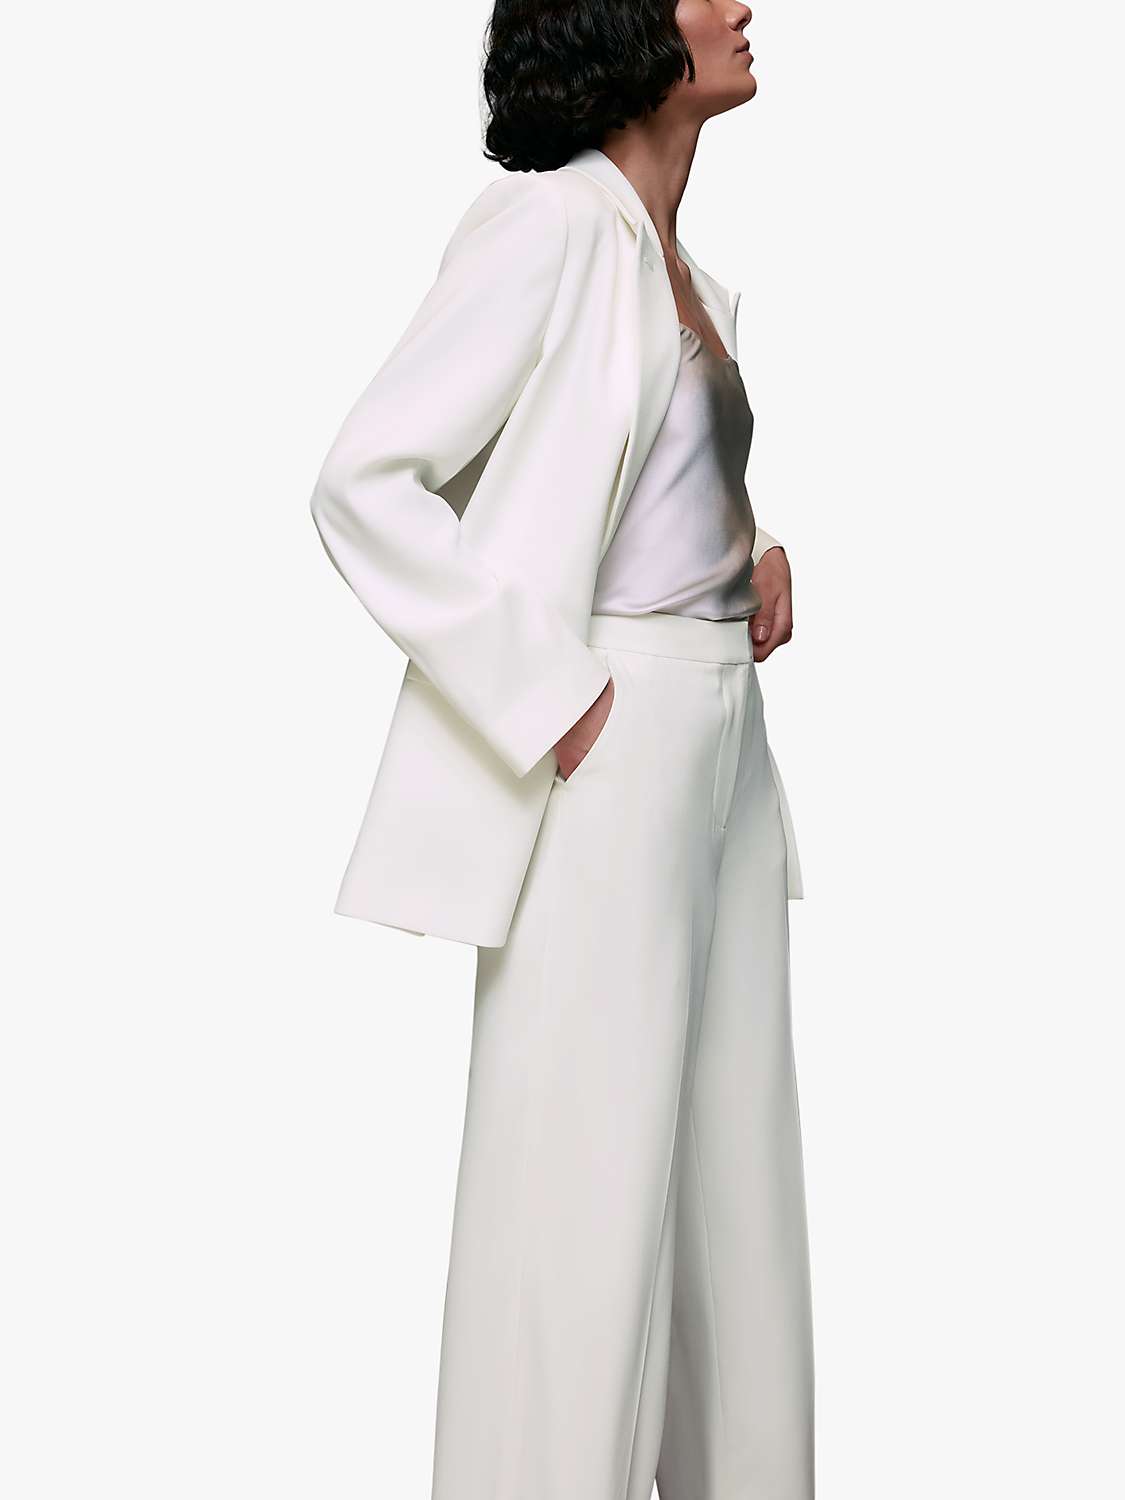 Buy Whistles Annie Wedding Trousers, Ivory Online at johnlewis.com